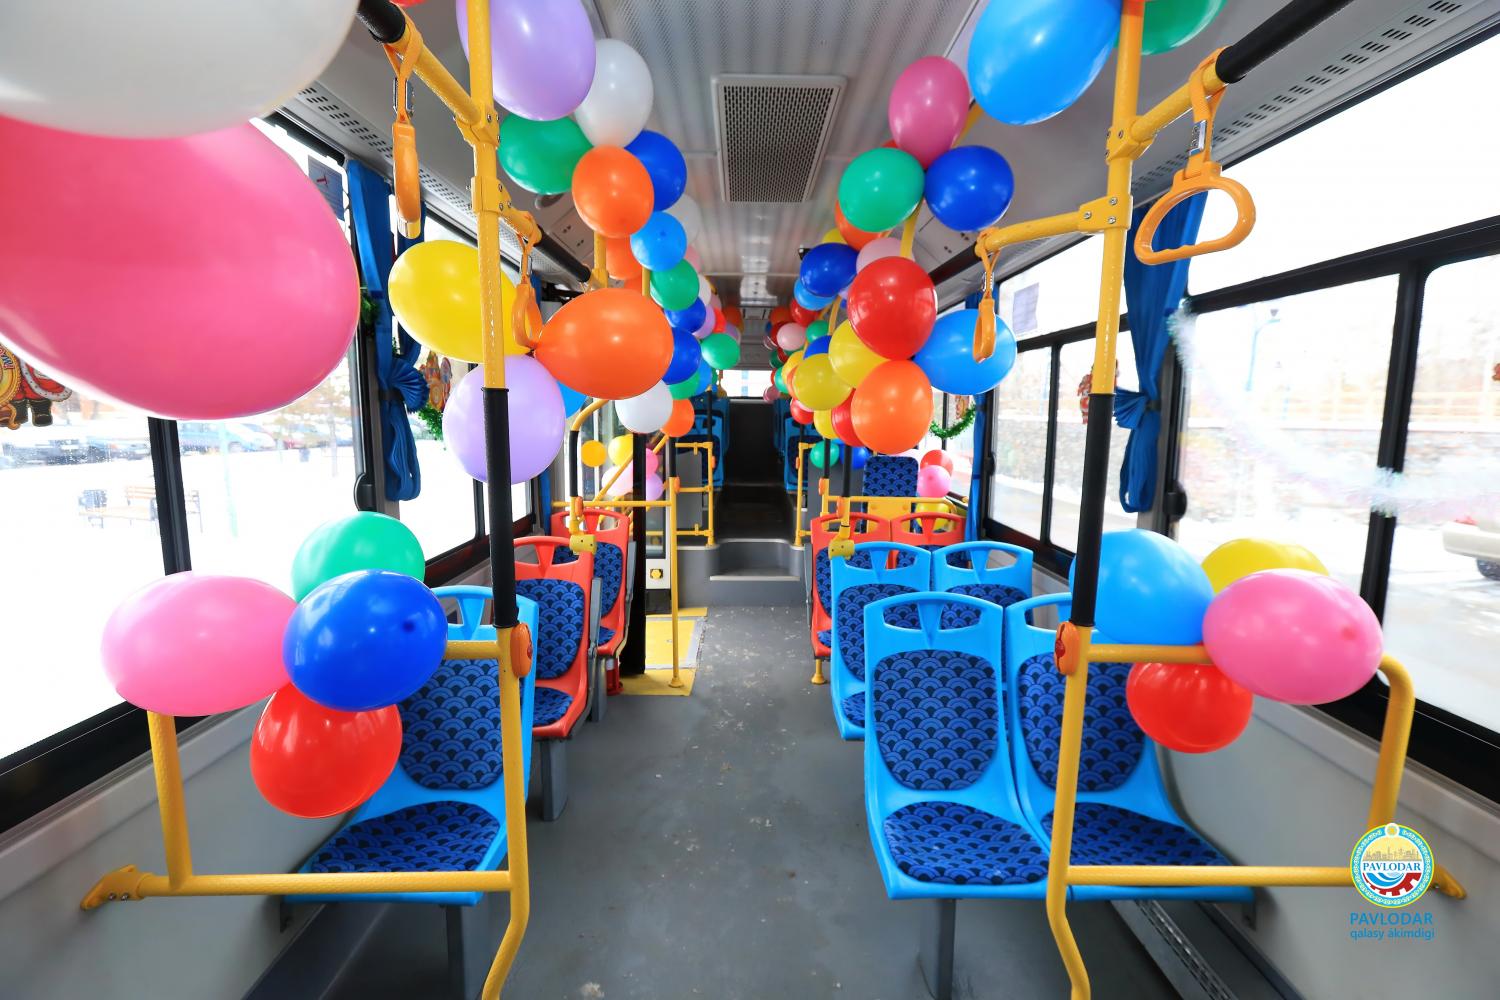 Tourist bus launched in test mode in Pavlodar